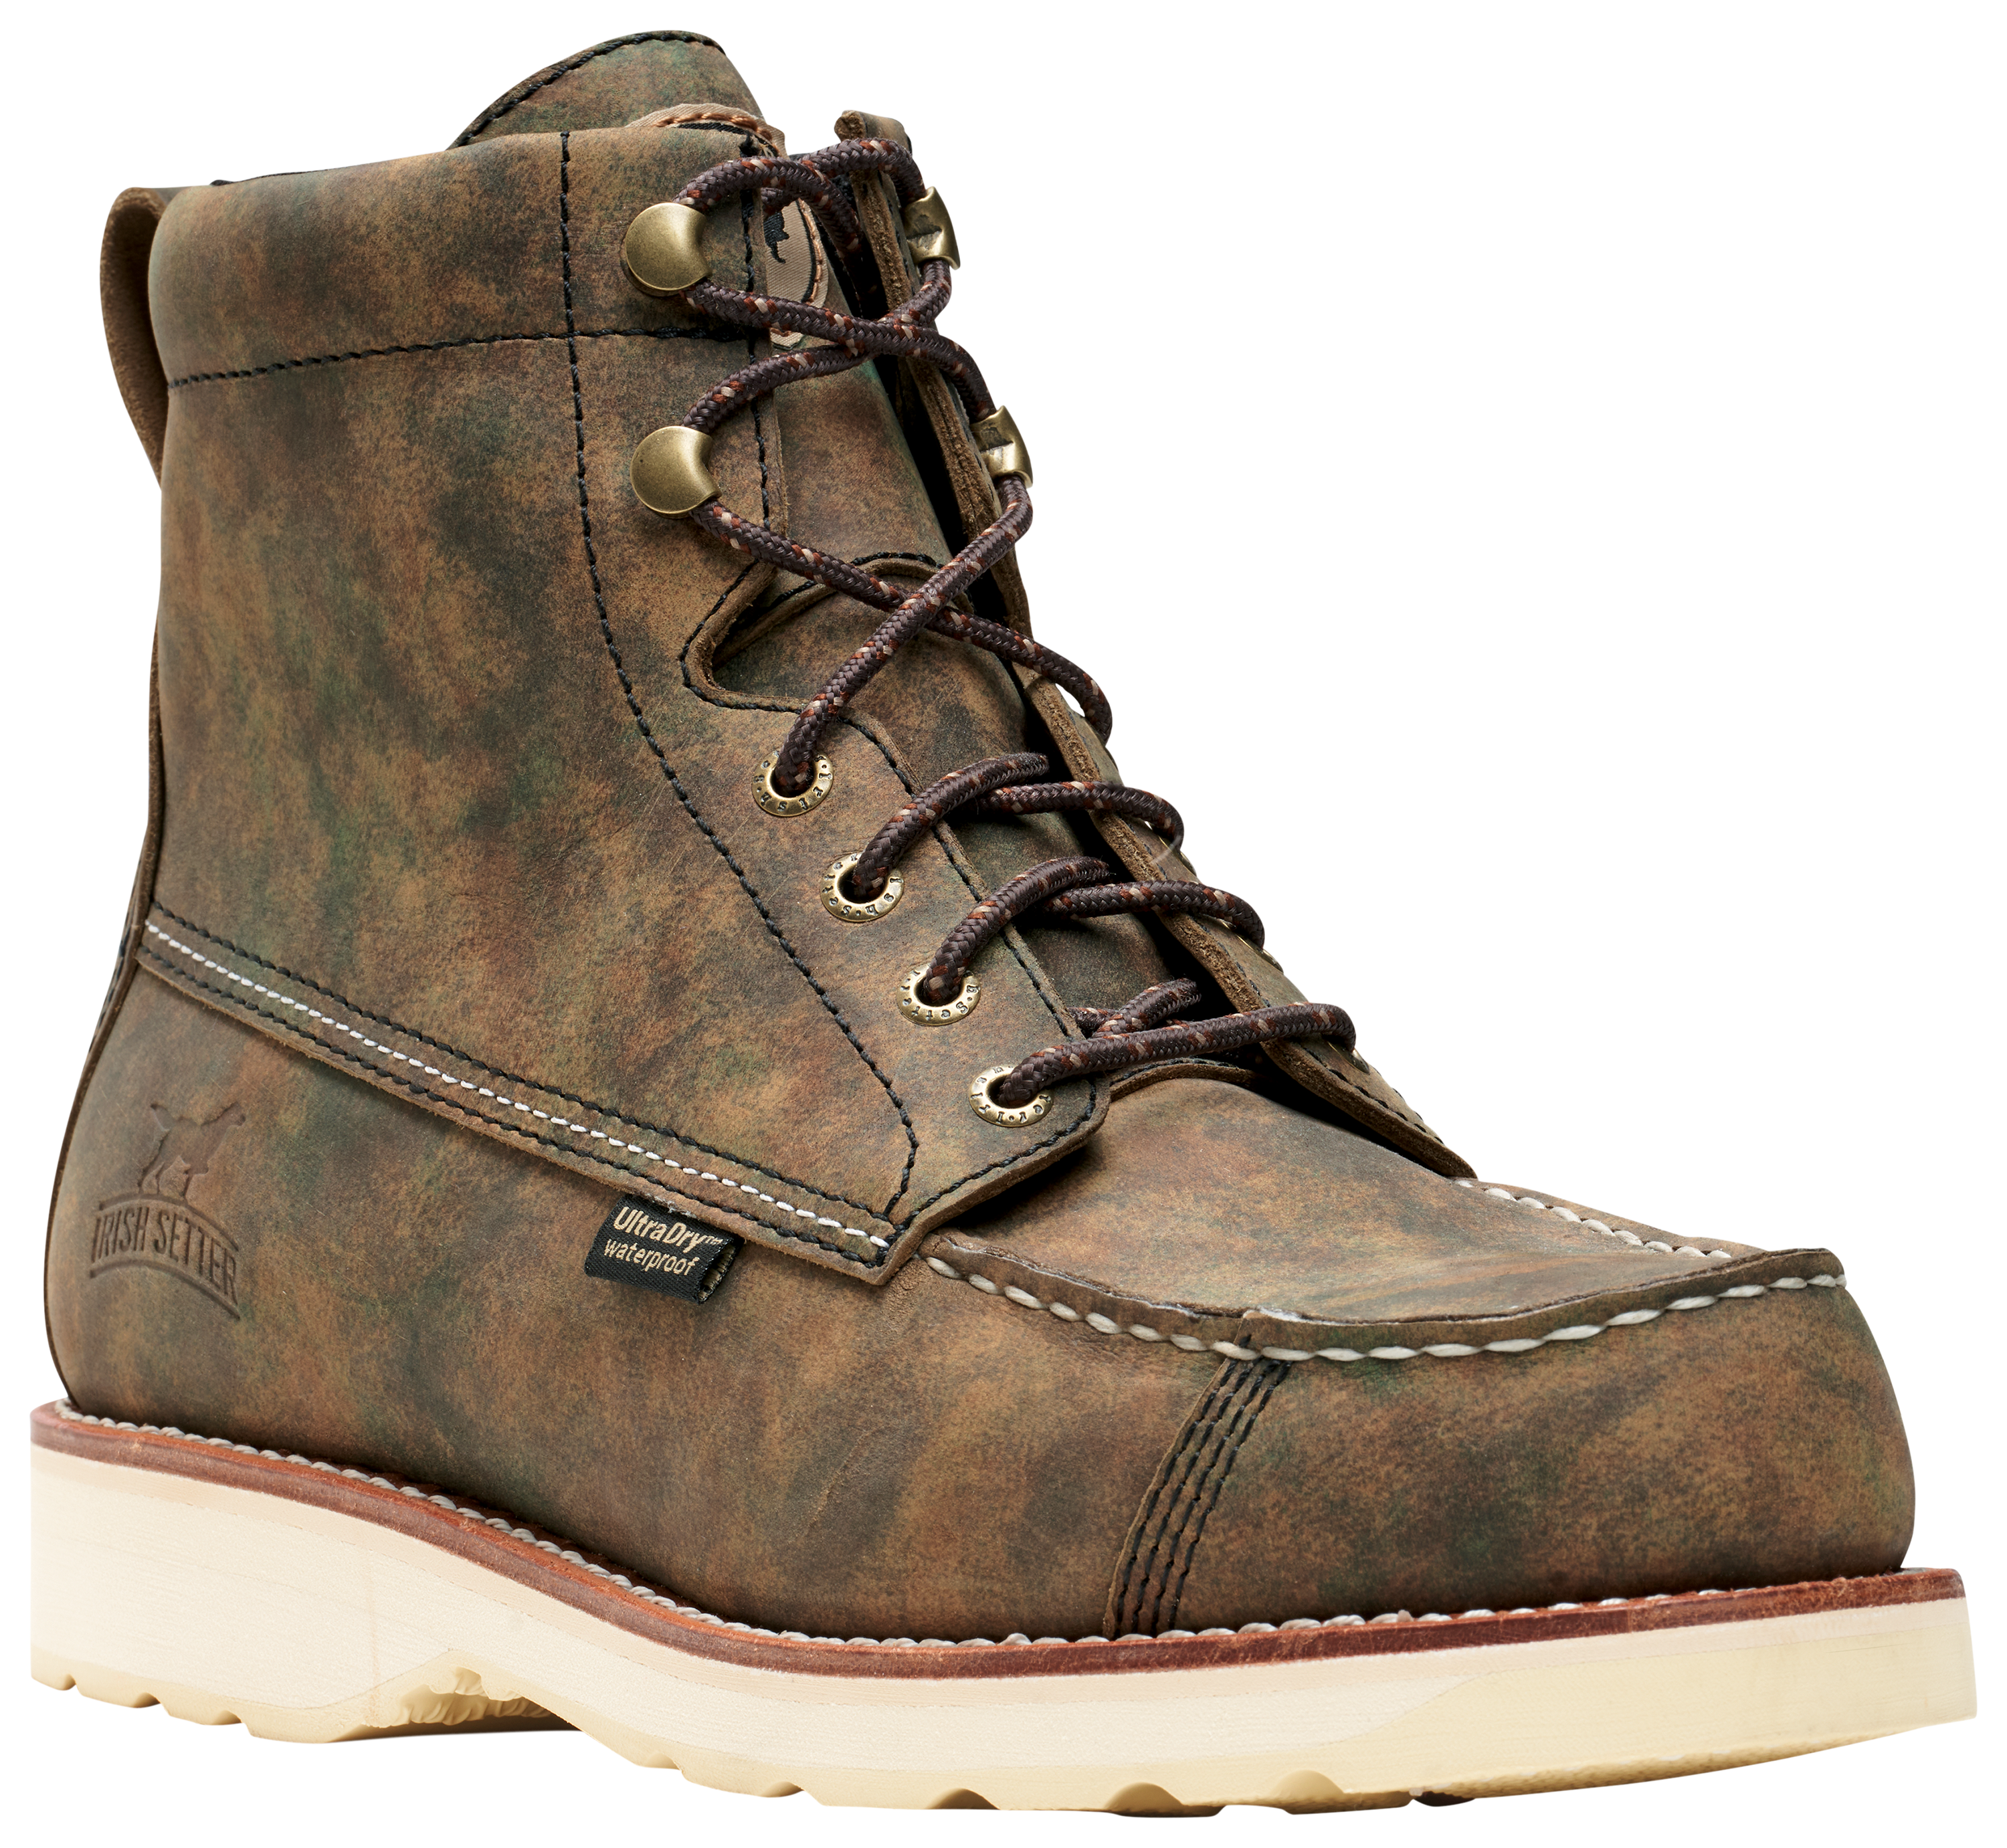 Irish Setter Wingshooter 7 Waterproof Hunting Boots for Men - Earth Camo - 10M